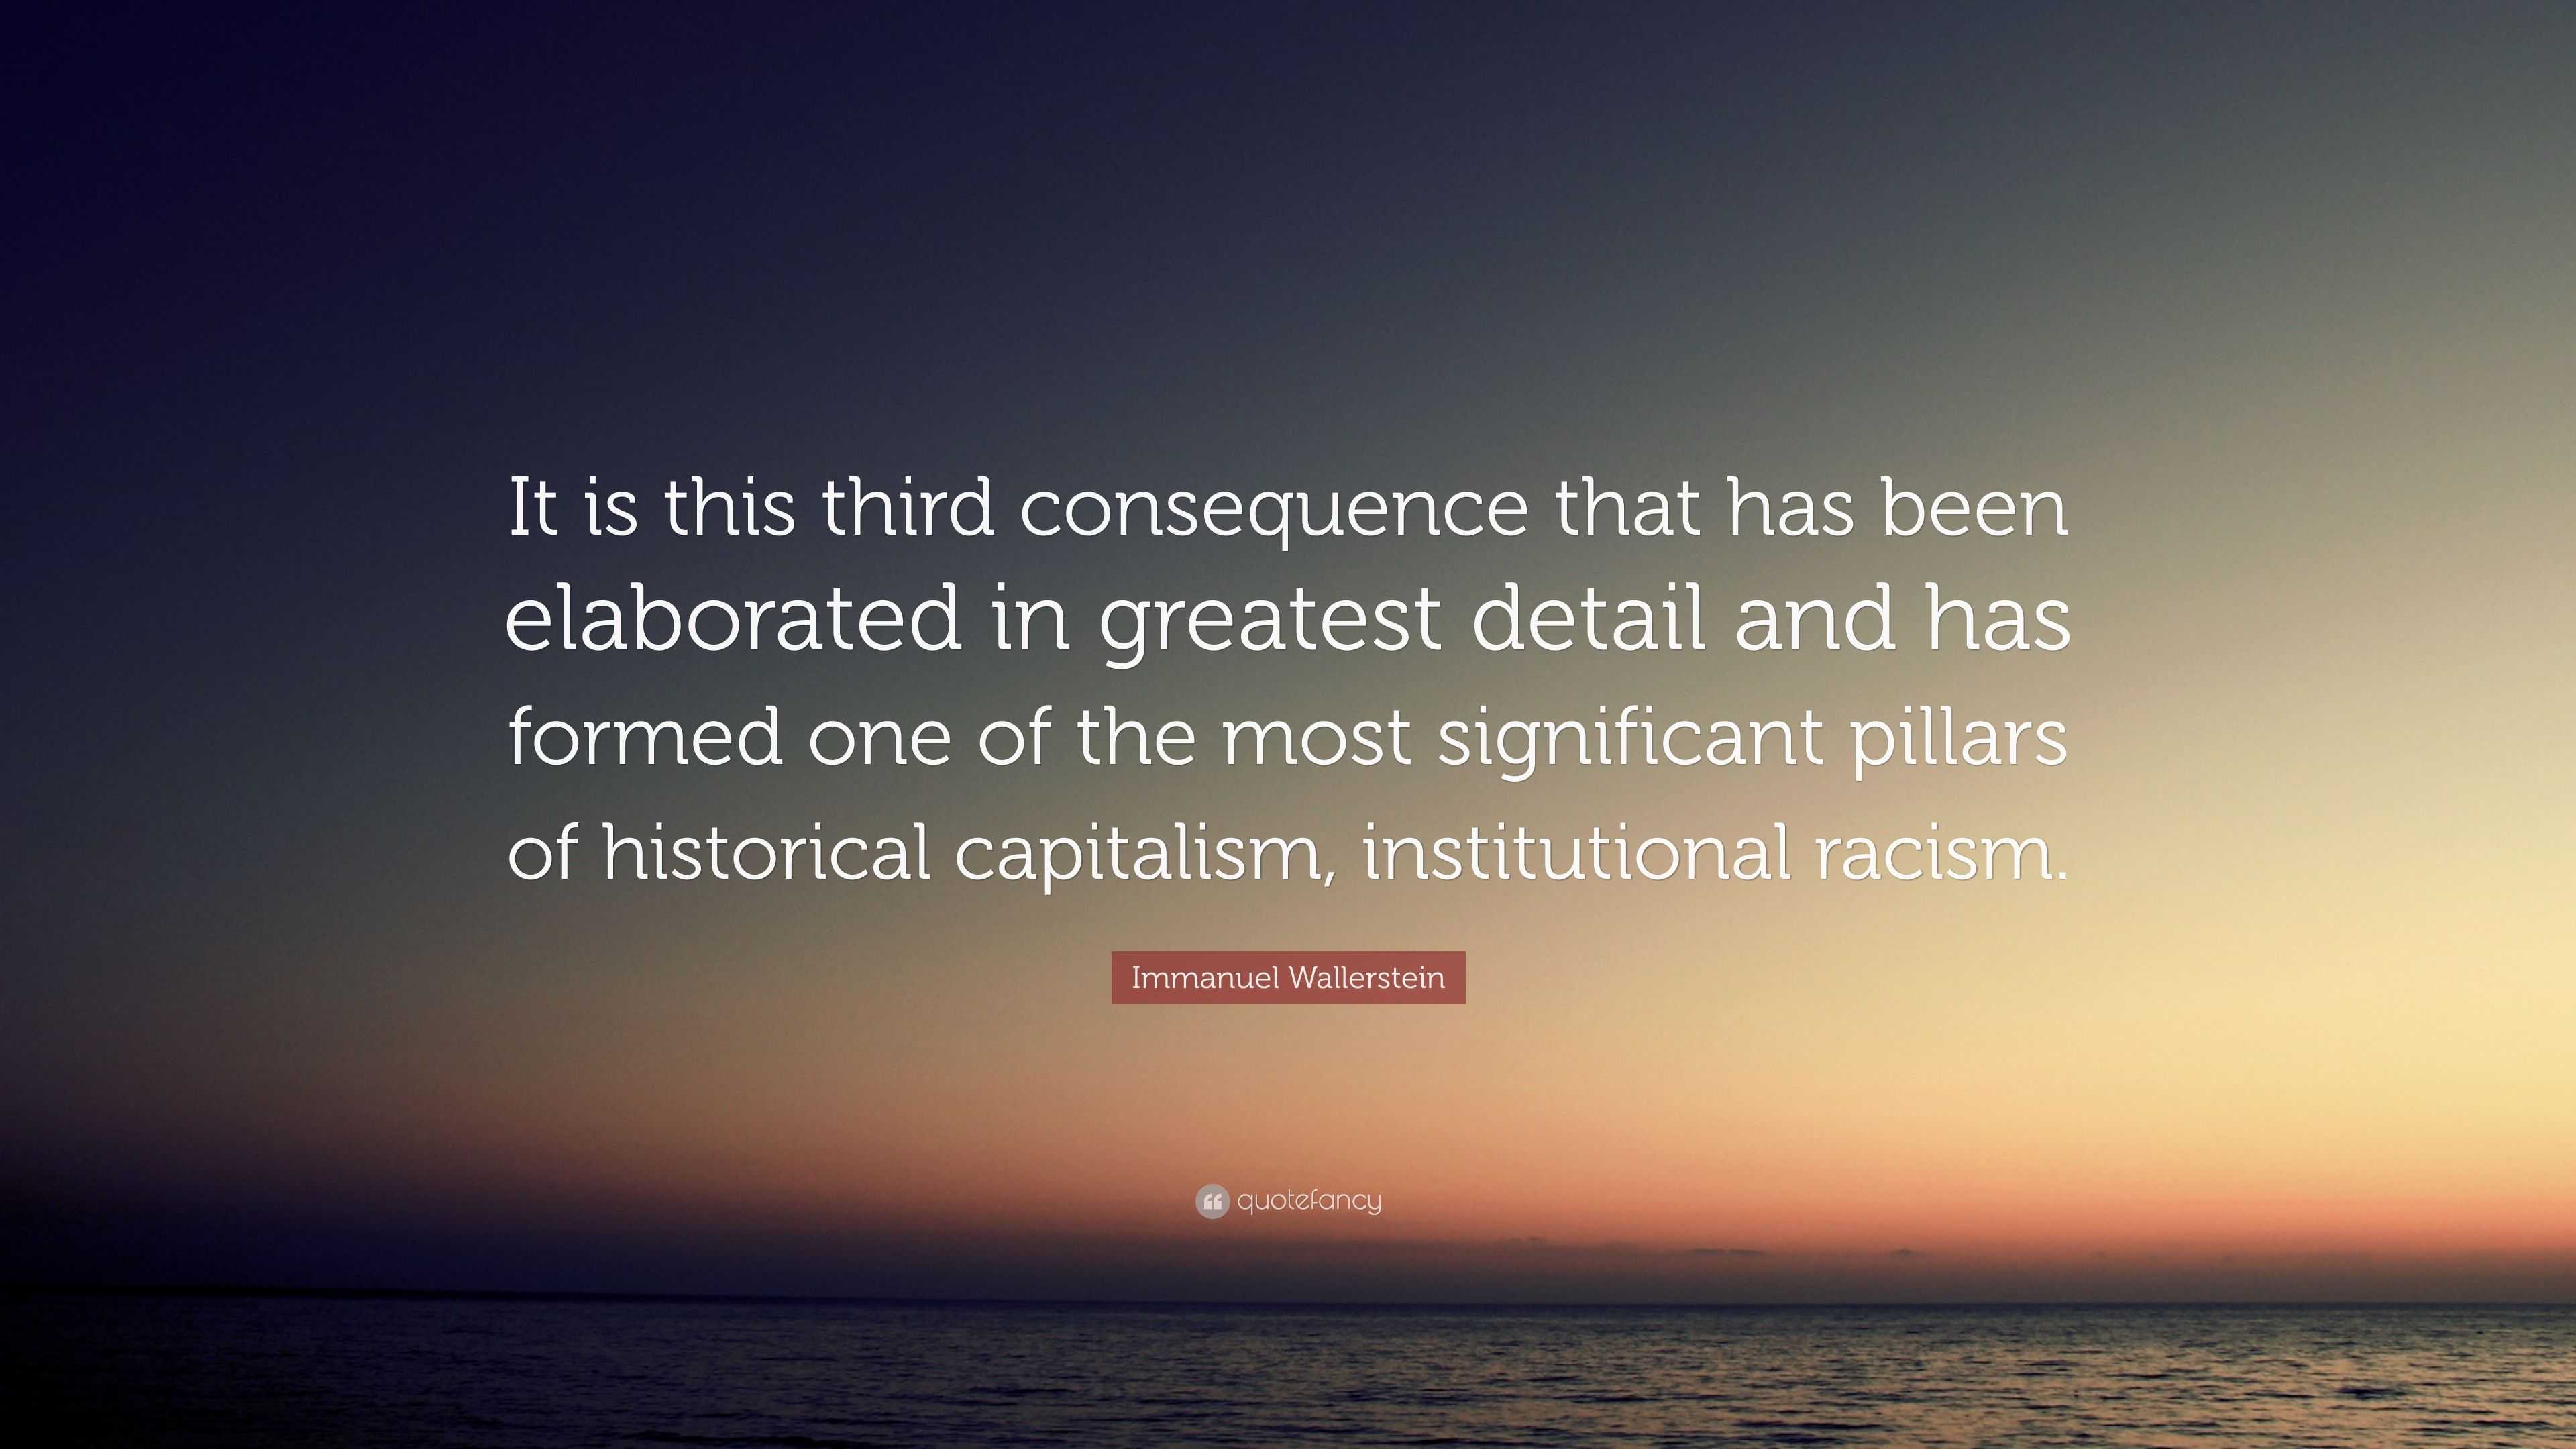 Immanuel Wallerstein Quote: “It is this third consequence that has been ...